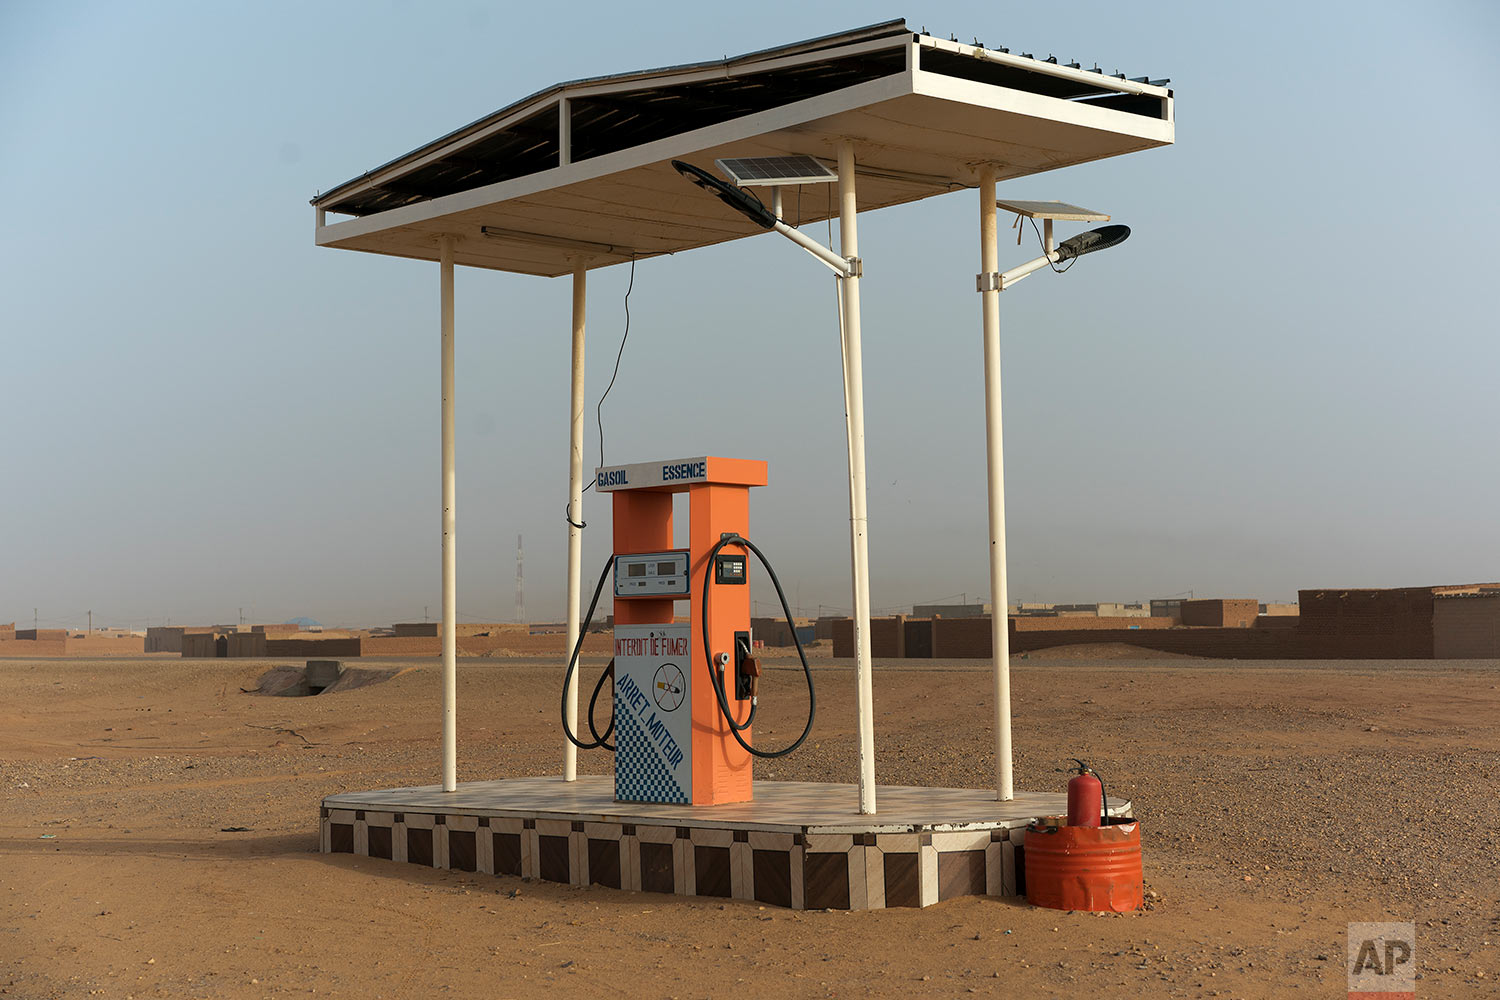  A gas pump stands in Arlit, the last major settlement in Niger's Tenere desert region of the south central Sahara on May 31, 2018. (AP Photo/Jerome Delay) 